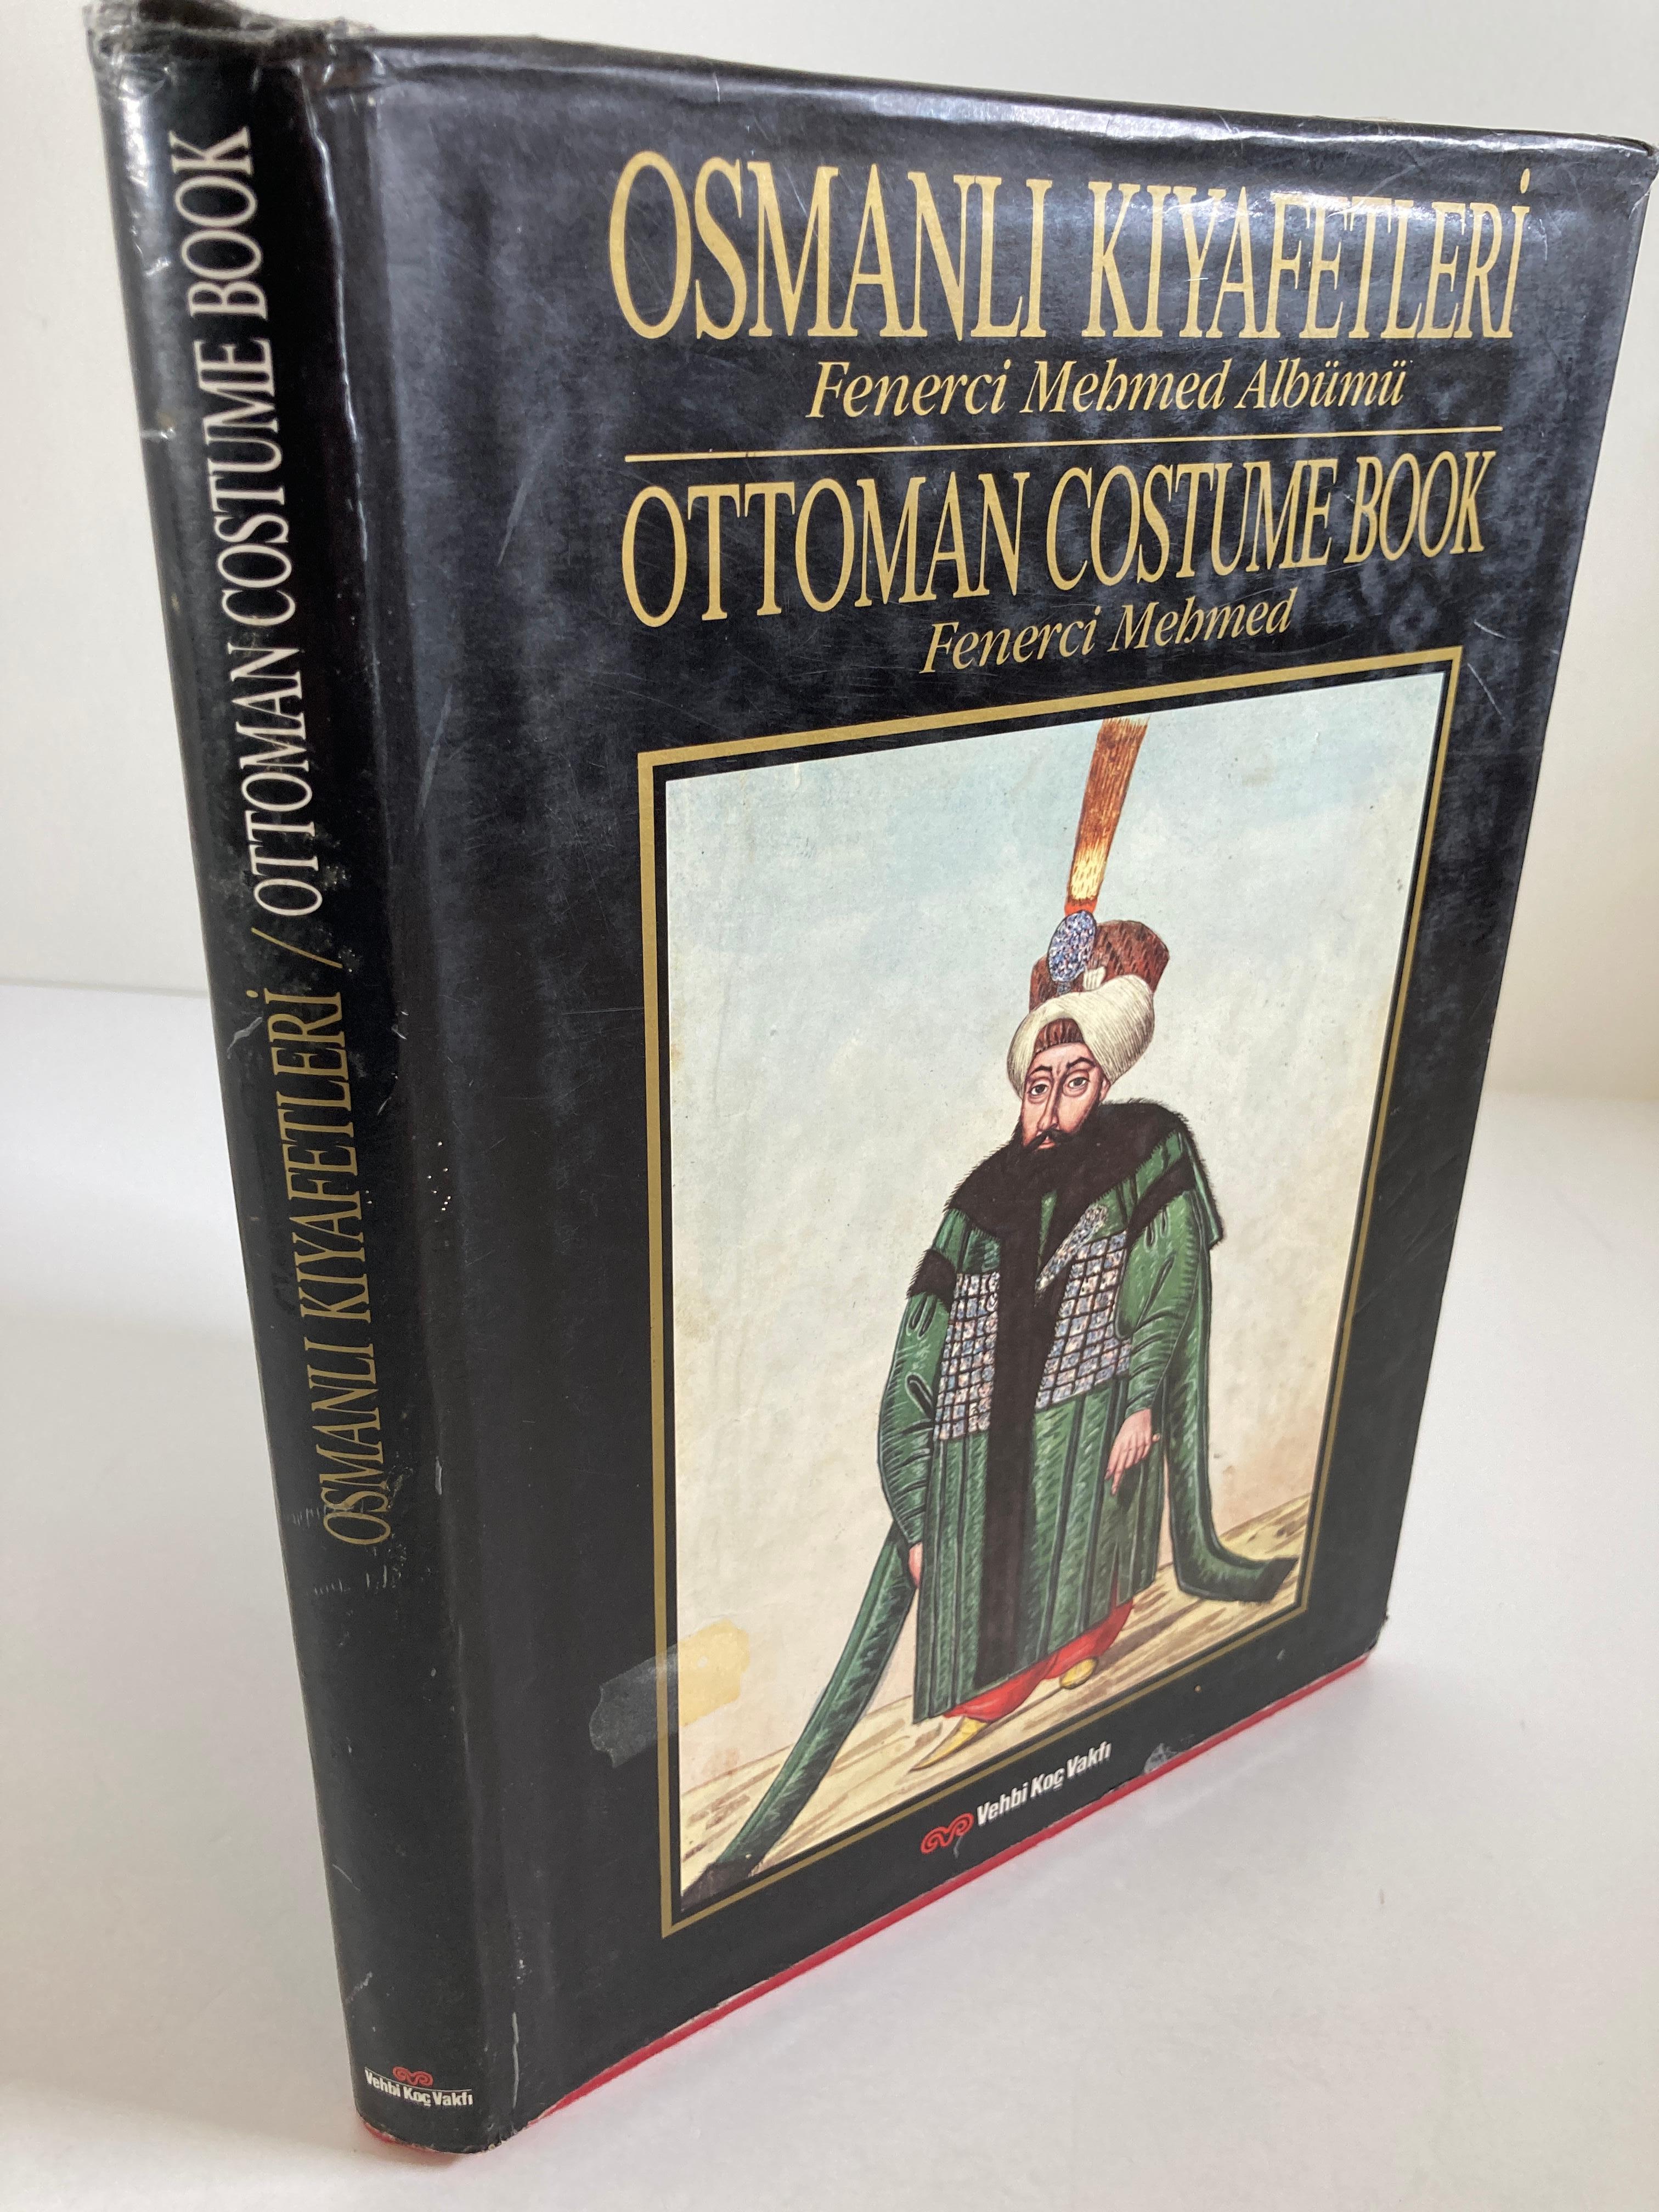 Ottoman Costume Book (Turkish) Hardcover, January 1, 1986.
by Fenerci Mehmed Fenerci MehmeT Album (Author)
From the 15th century on, Europeans attempted to become acquainted with the Turks, who were the representatives of a growing and ever more